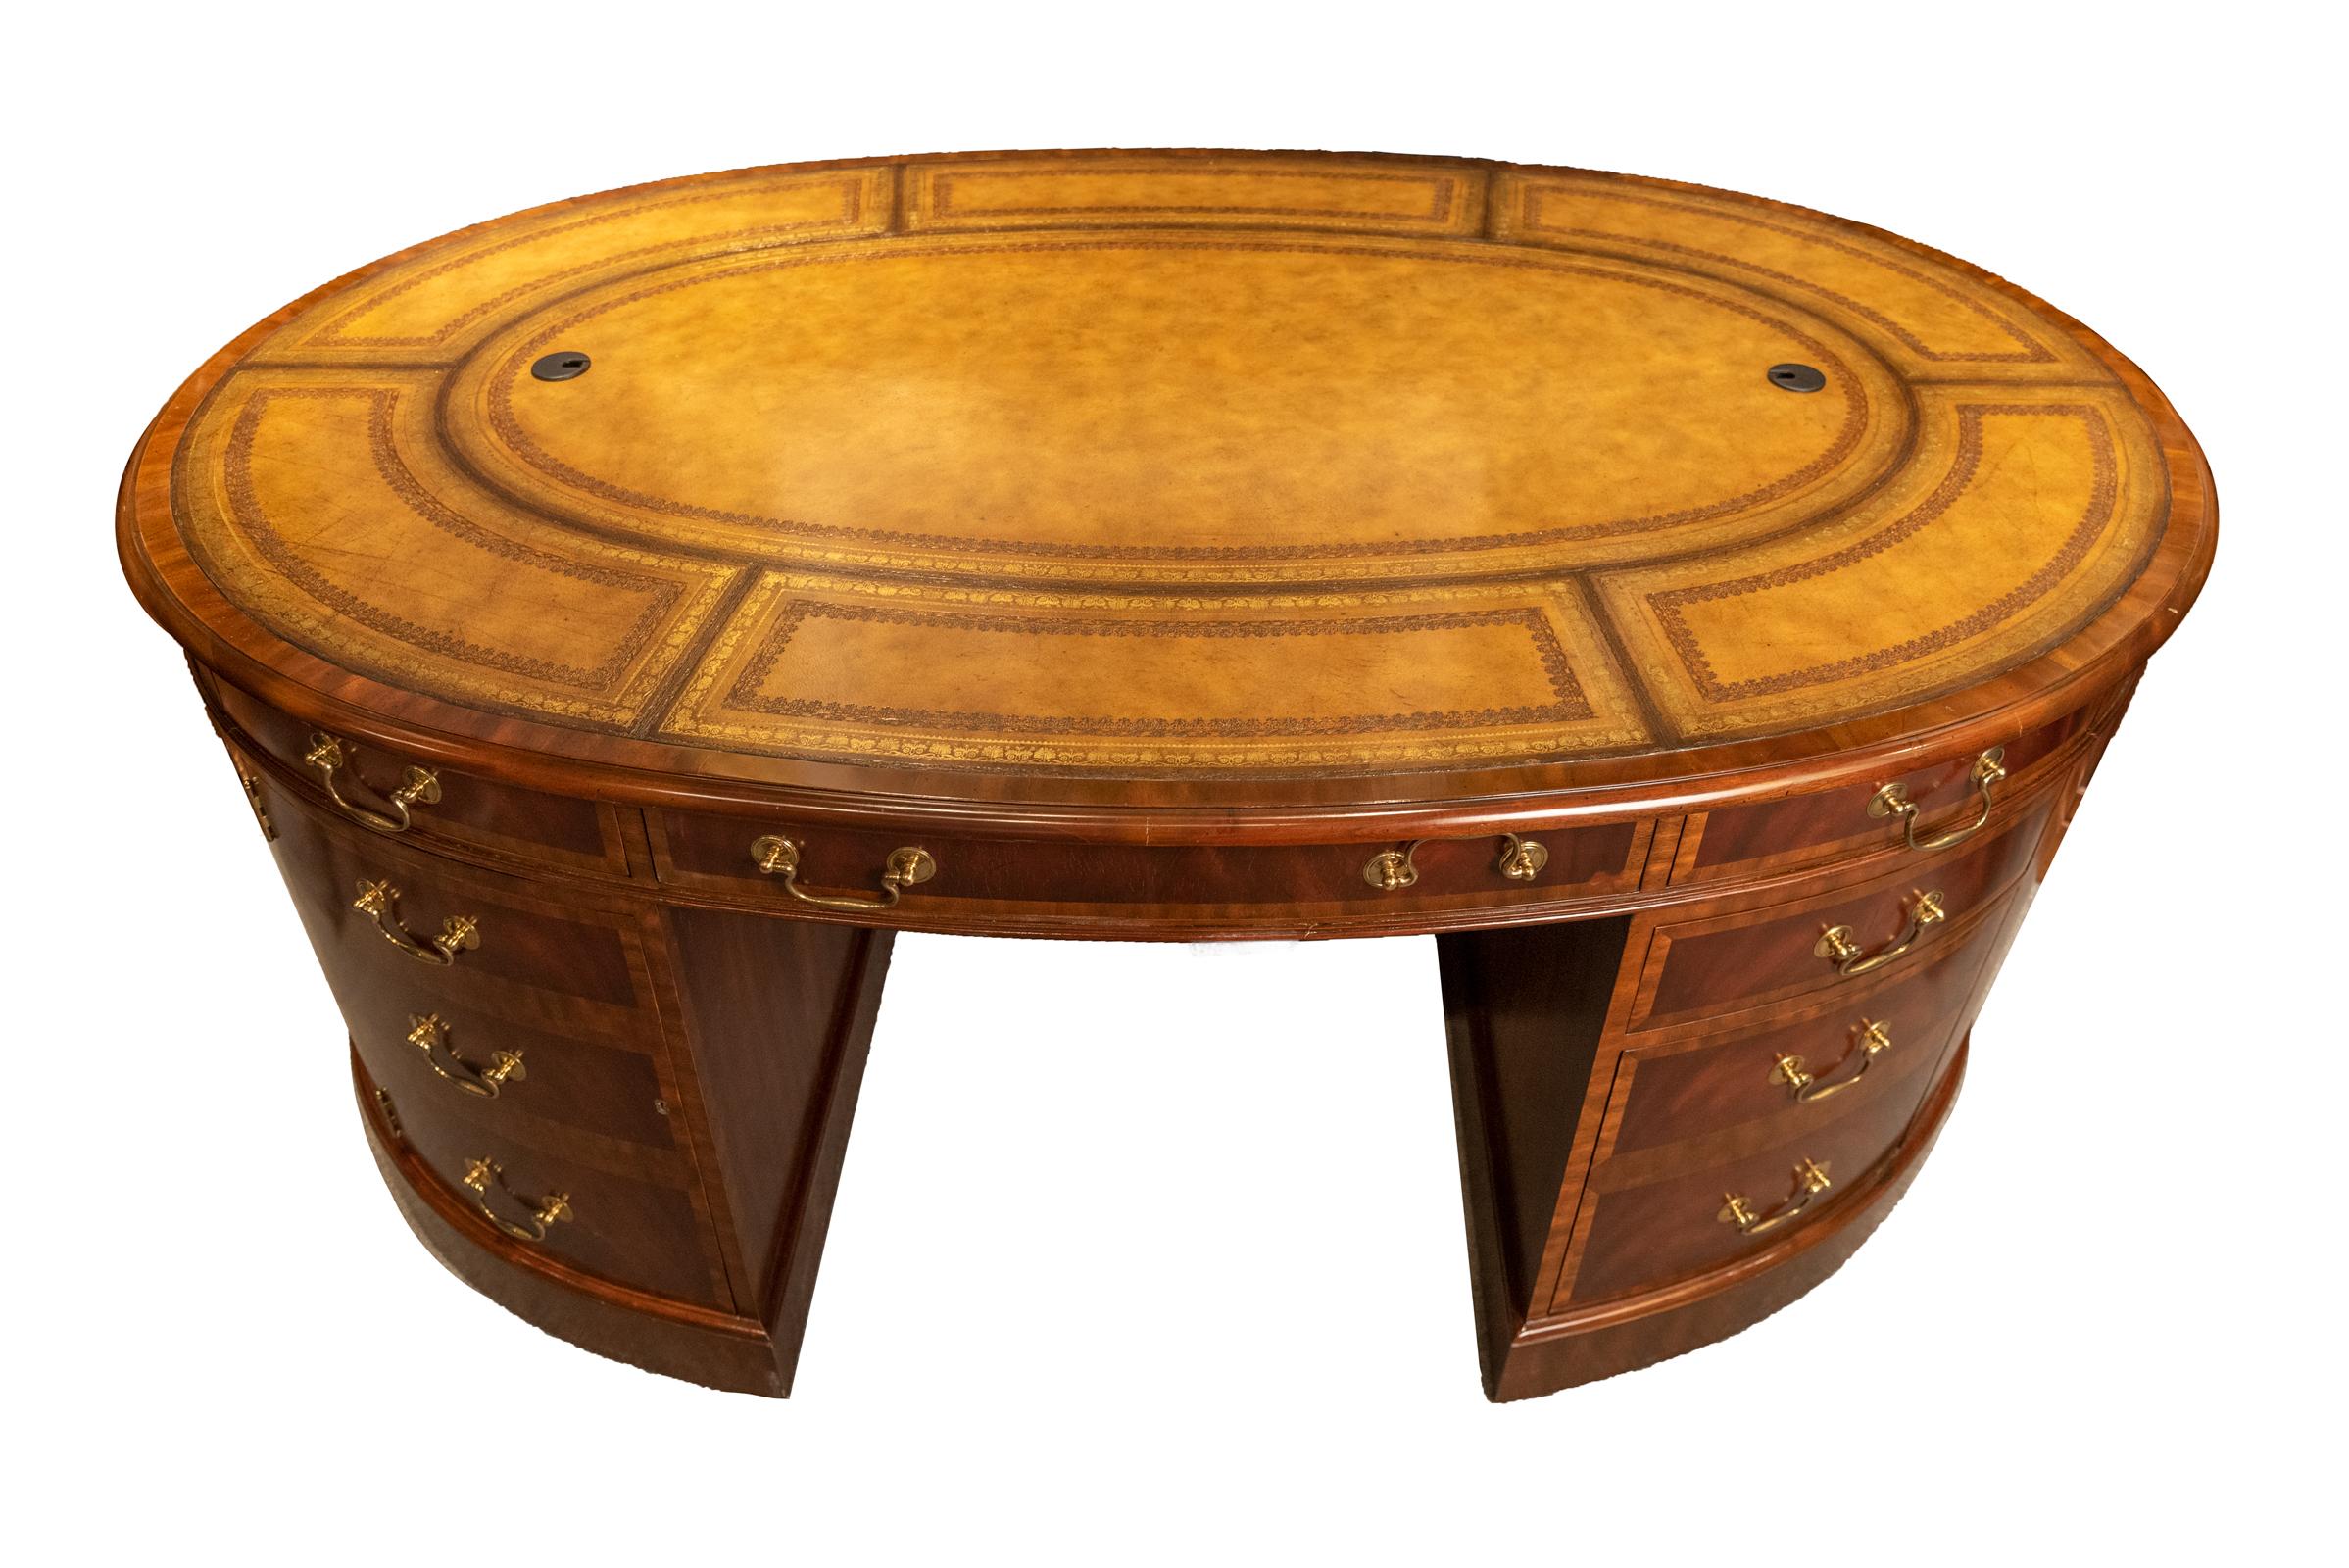 Fine oval leather-top partners desk. With a leather inset top and walnut and flame mahogany veneers, this desk is made in three pieces: two pedestals and a top. Drawers and files on both sides of this desk make it a true partners desk: four small